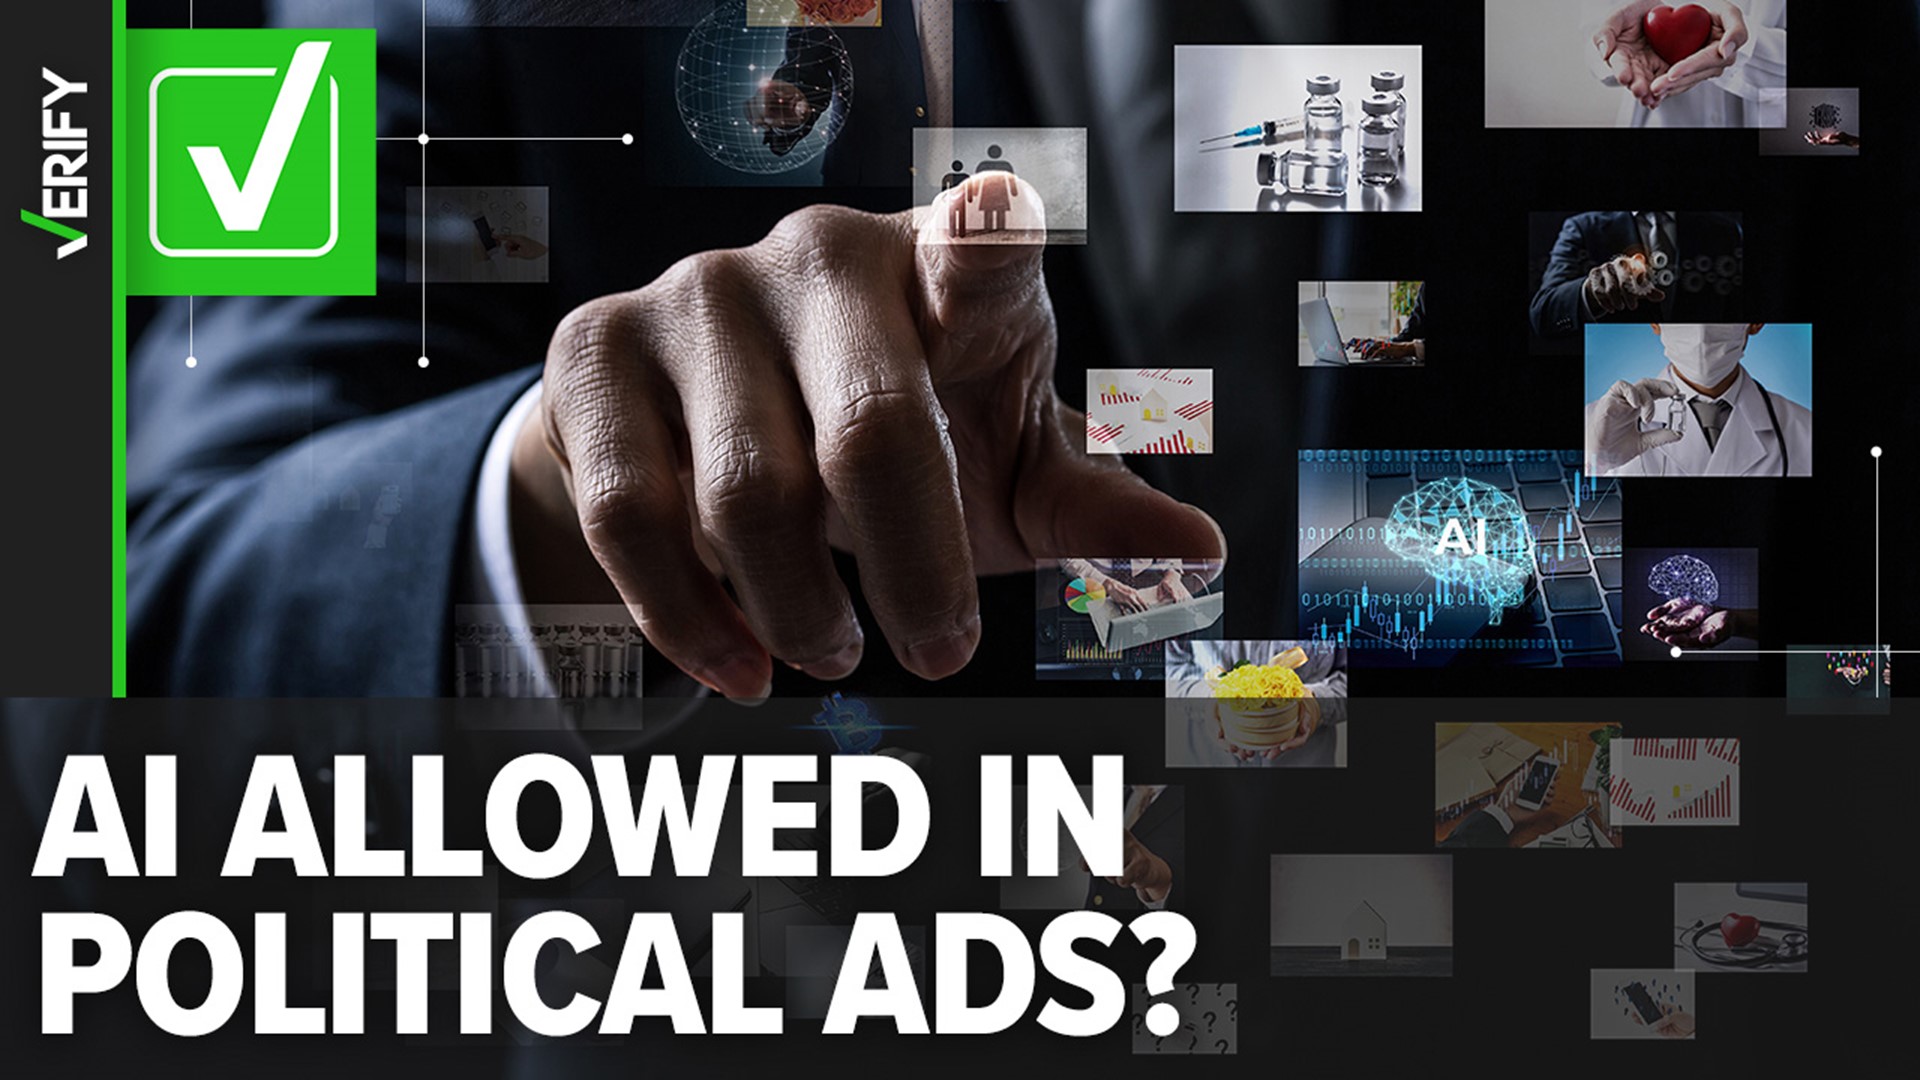 While lawmakers and the FEC have considered rules for the use of artificial intelligence in political advertising, there are no laws against it yet.